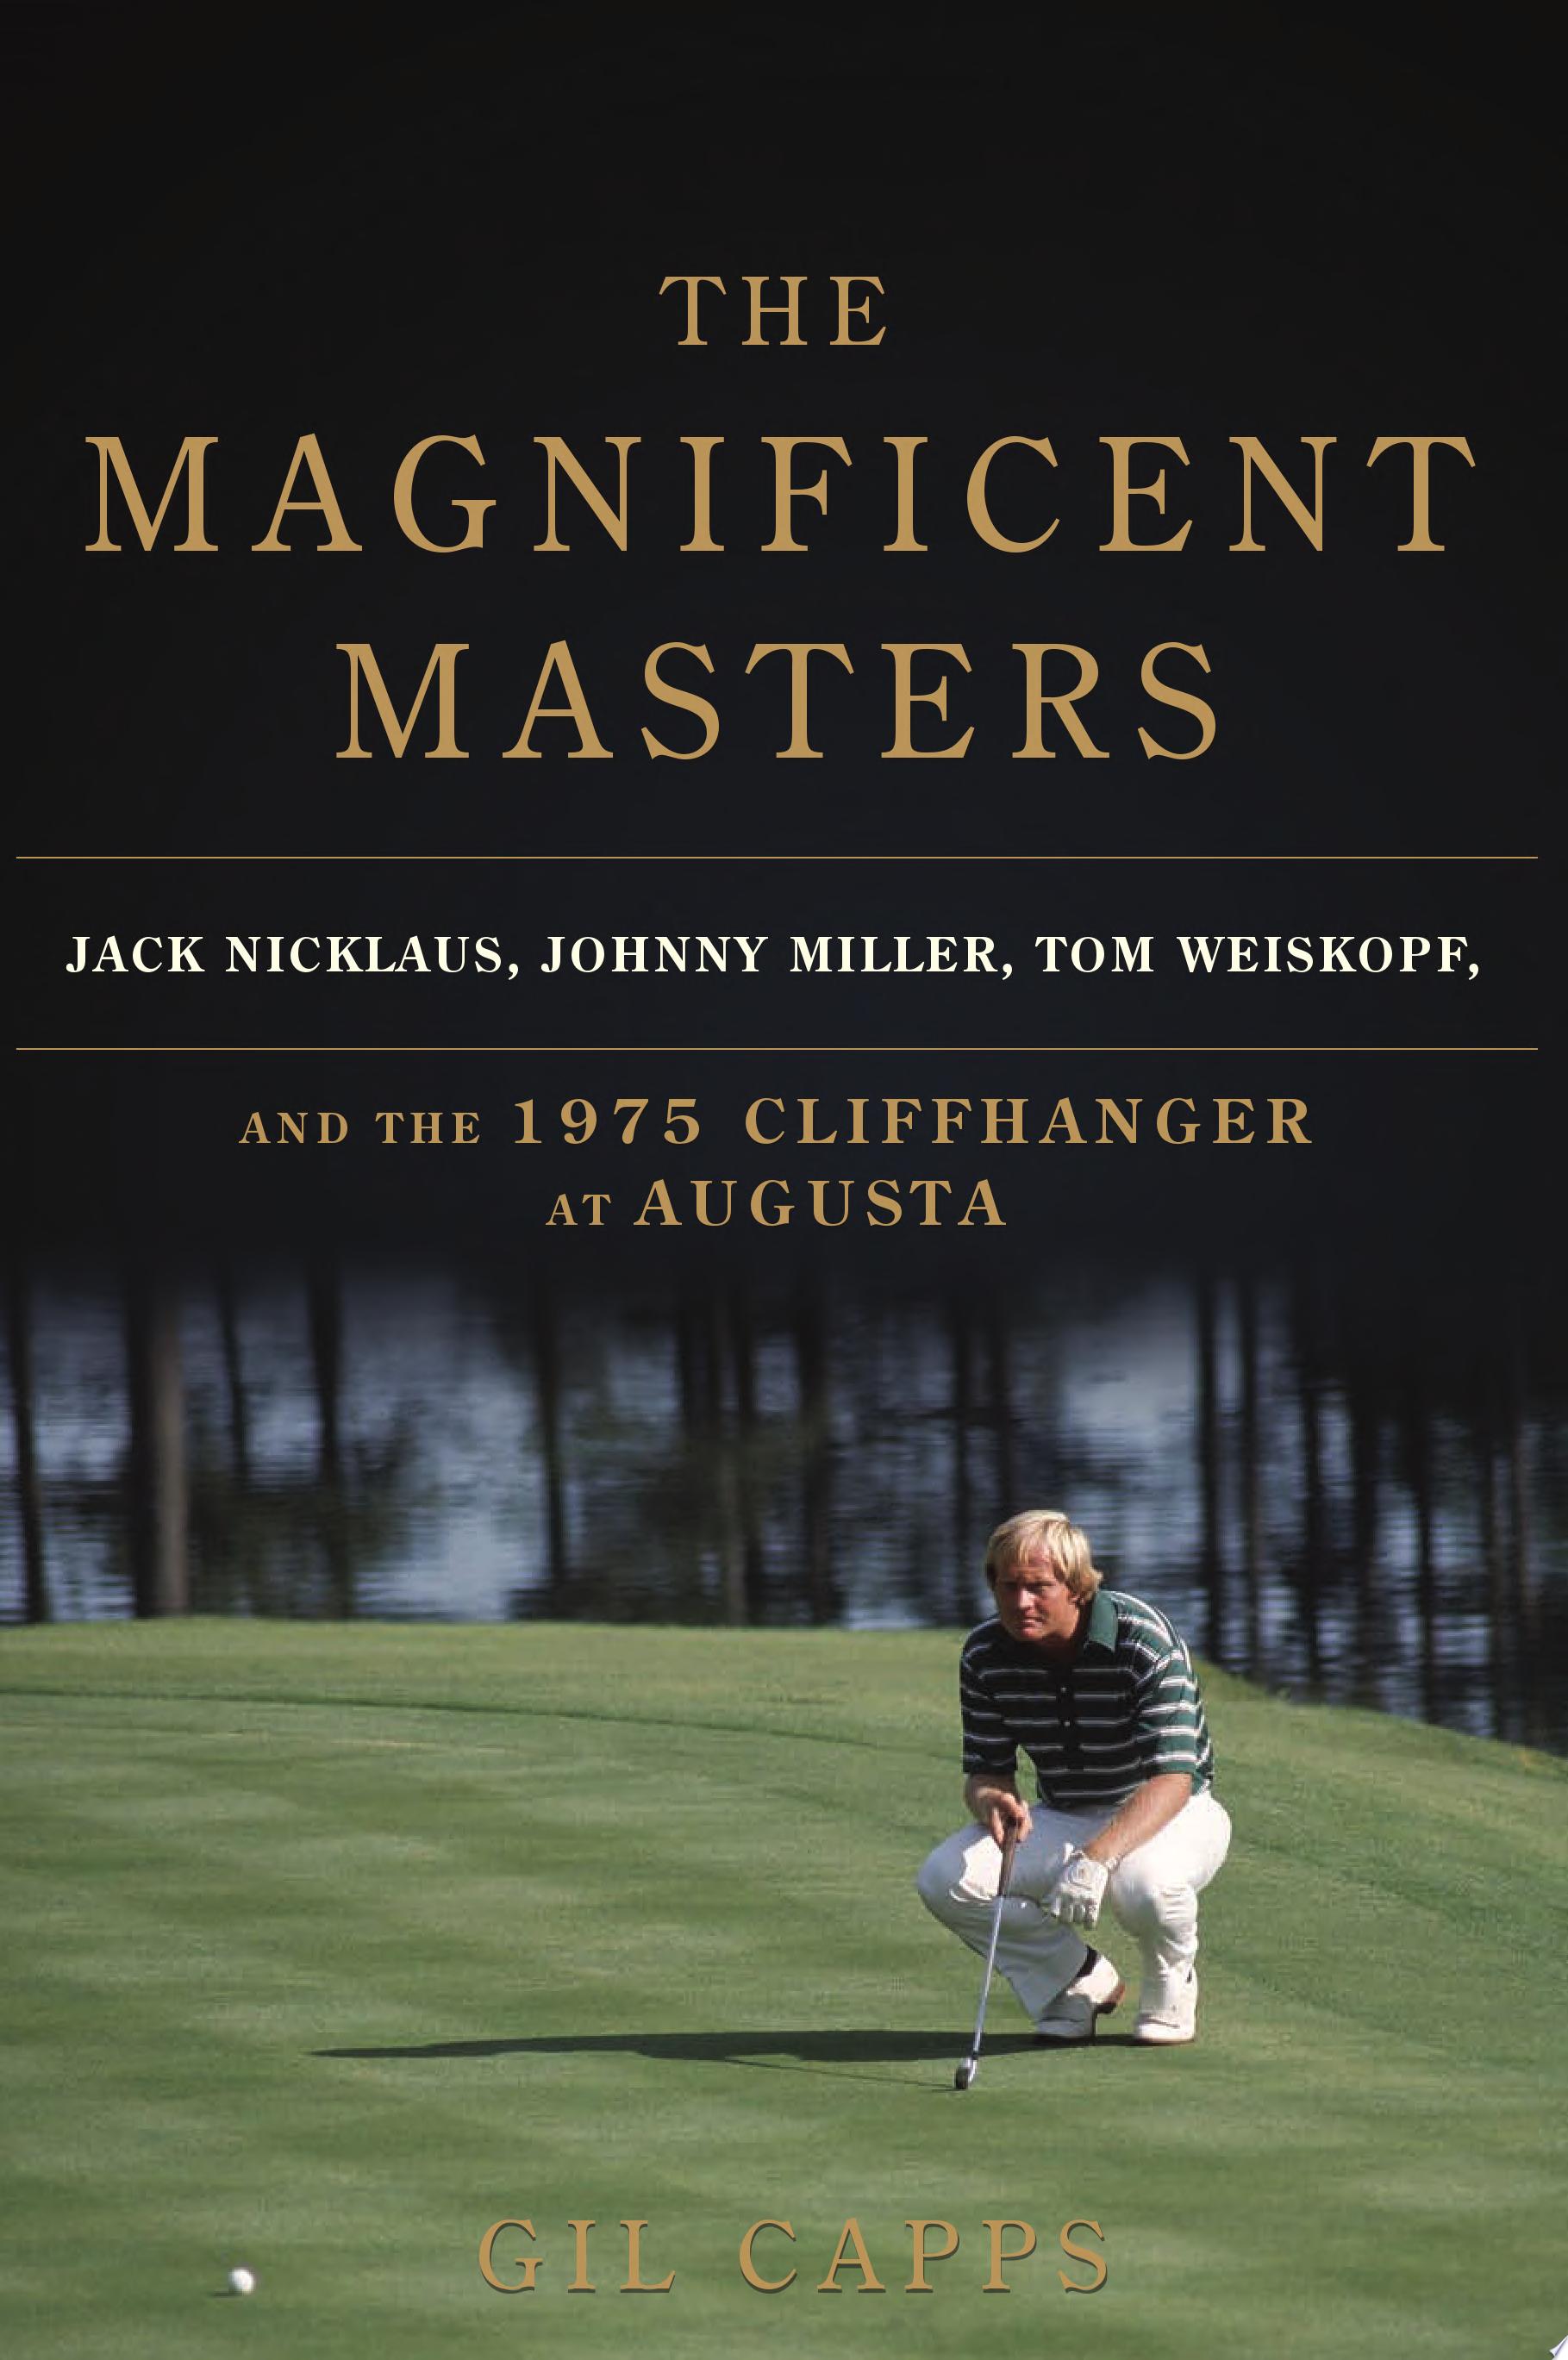 Image for "The Magnificent Masters"